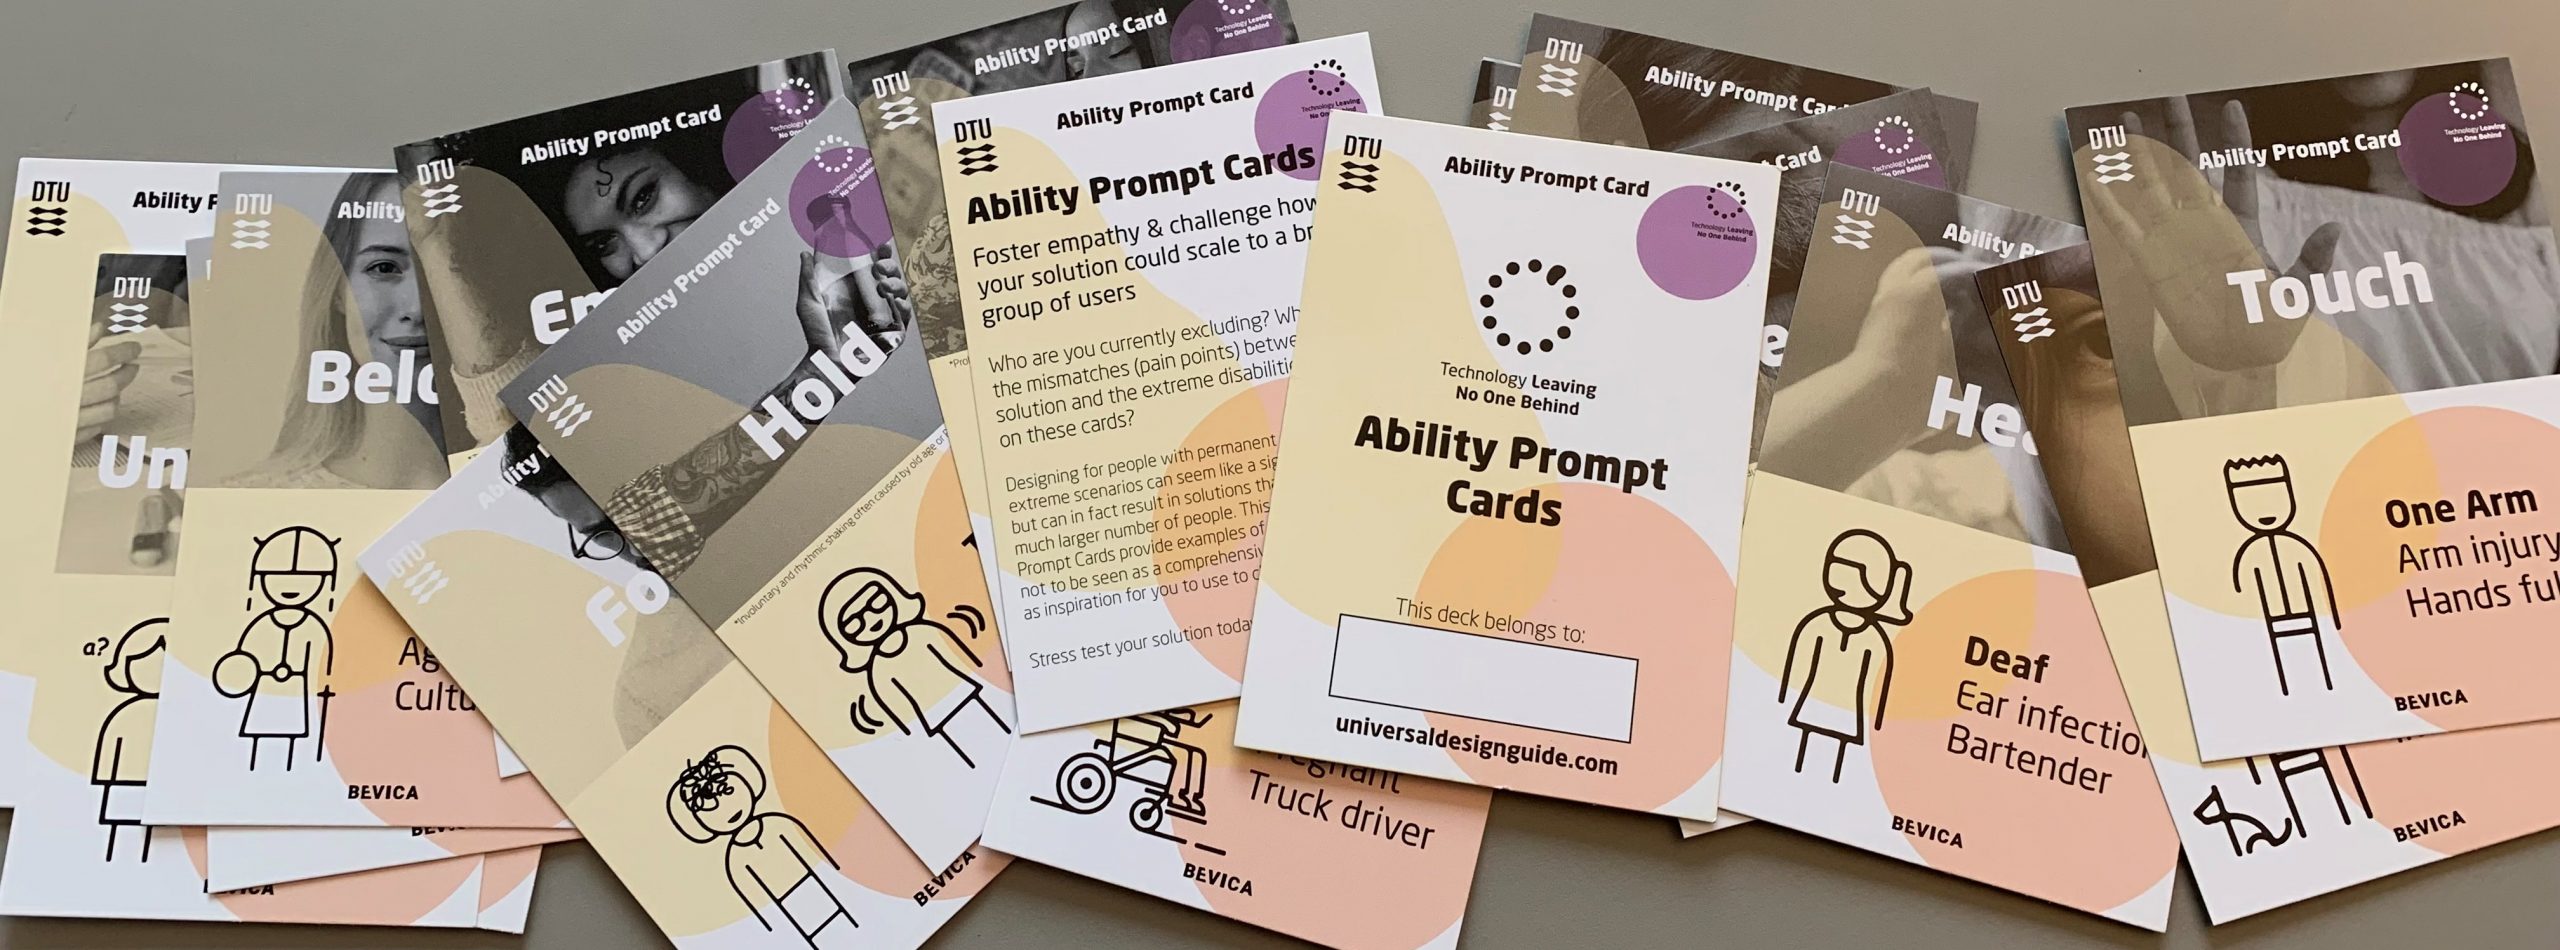 Ability prompt cards